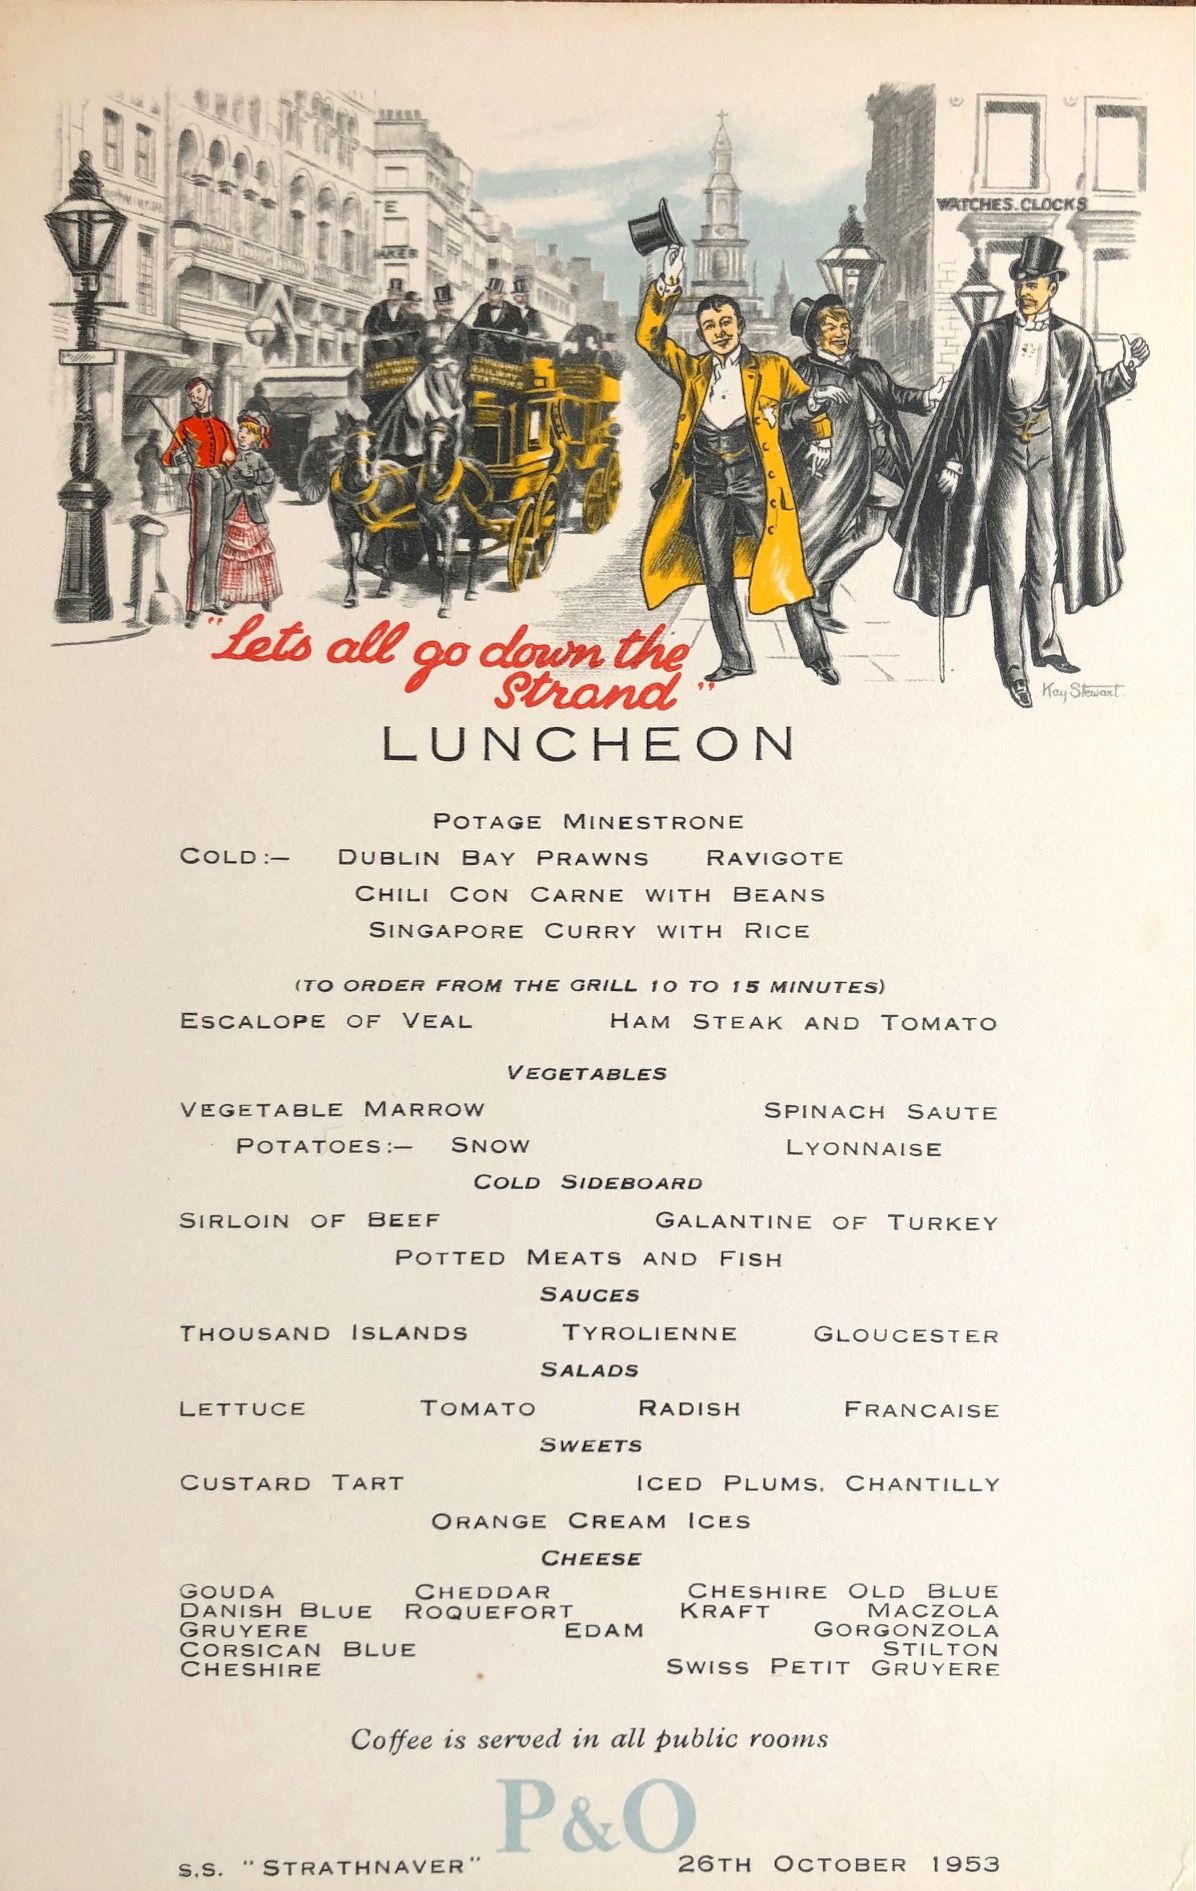 *NEW* P & O Lines. S.S. "Strathnaver" Luncheon Menu - Let's All Go Down to the Strand